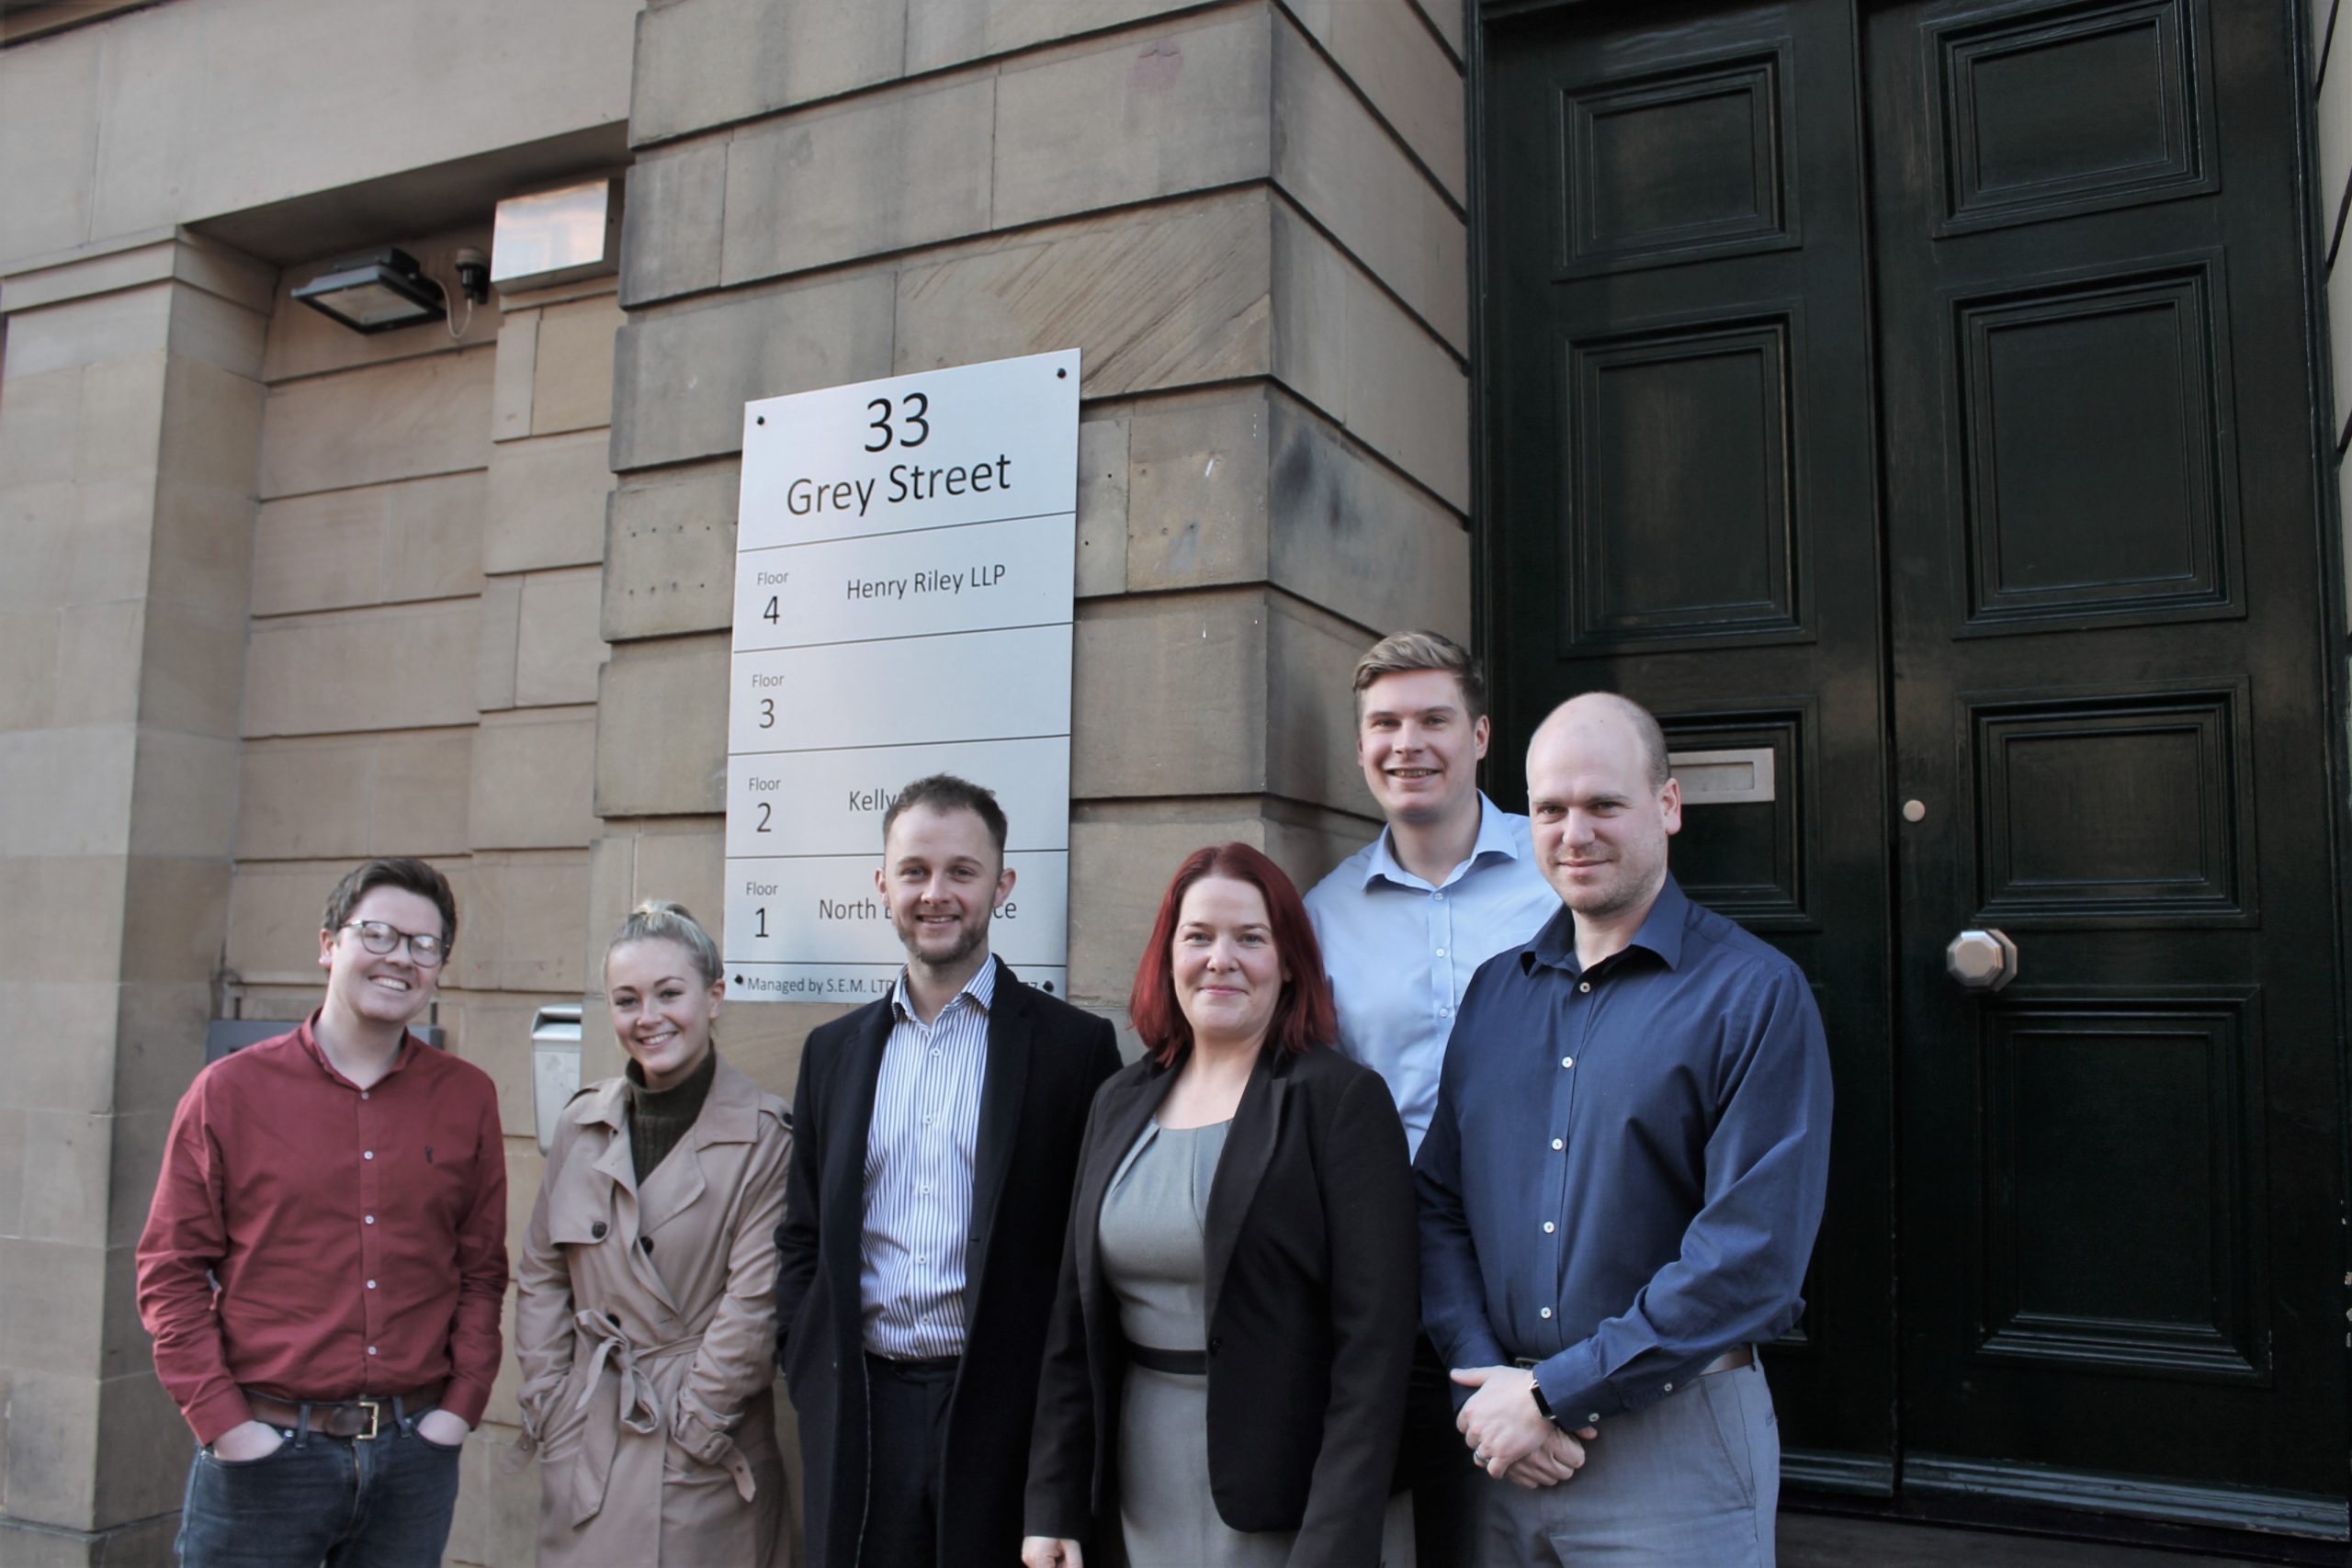 Growth fuels Grey Street relocation for Henry Riley @HenryRileyLLP